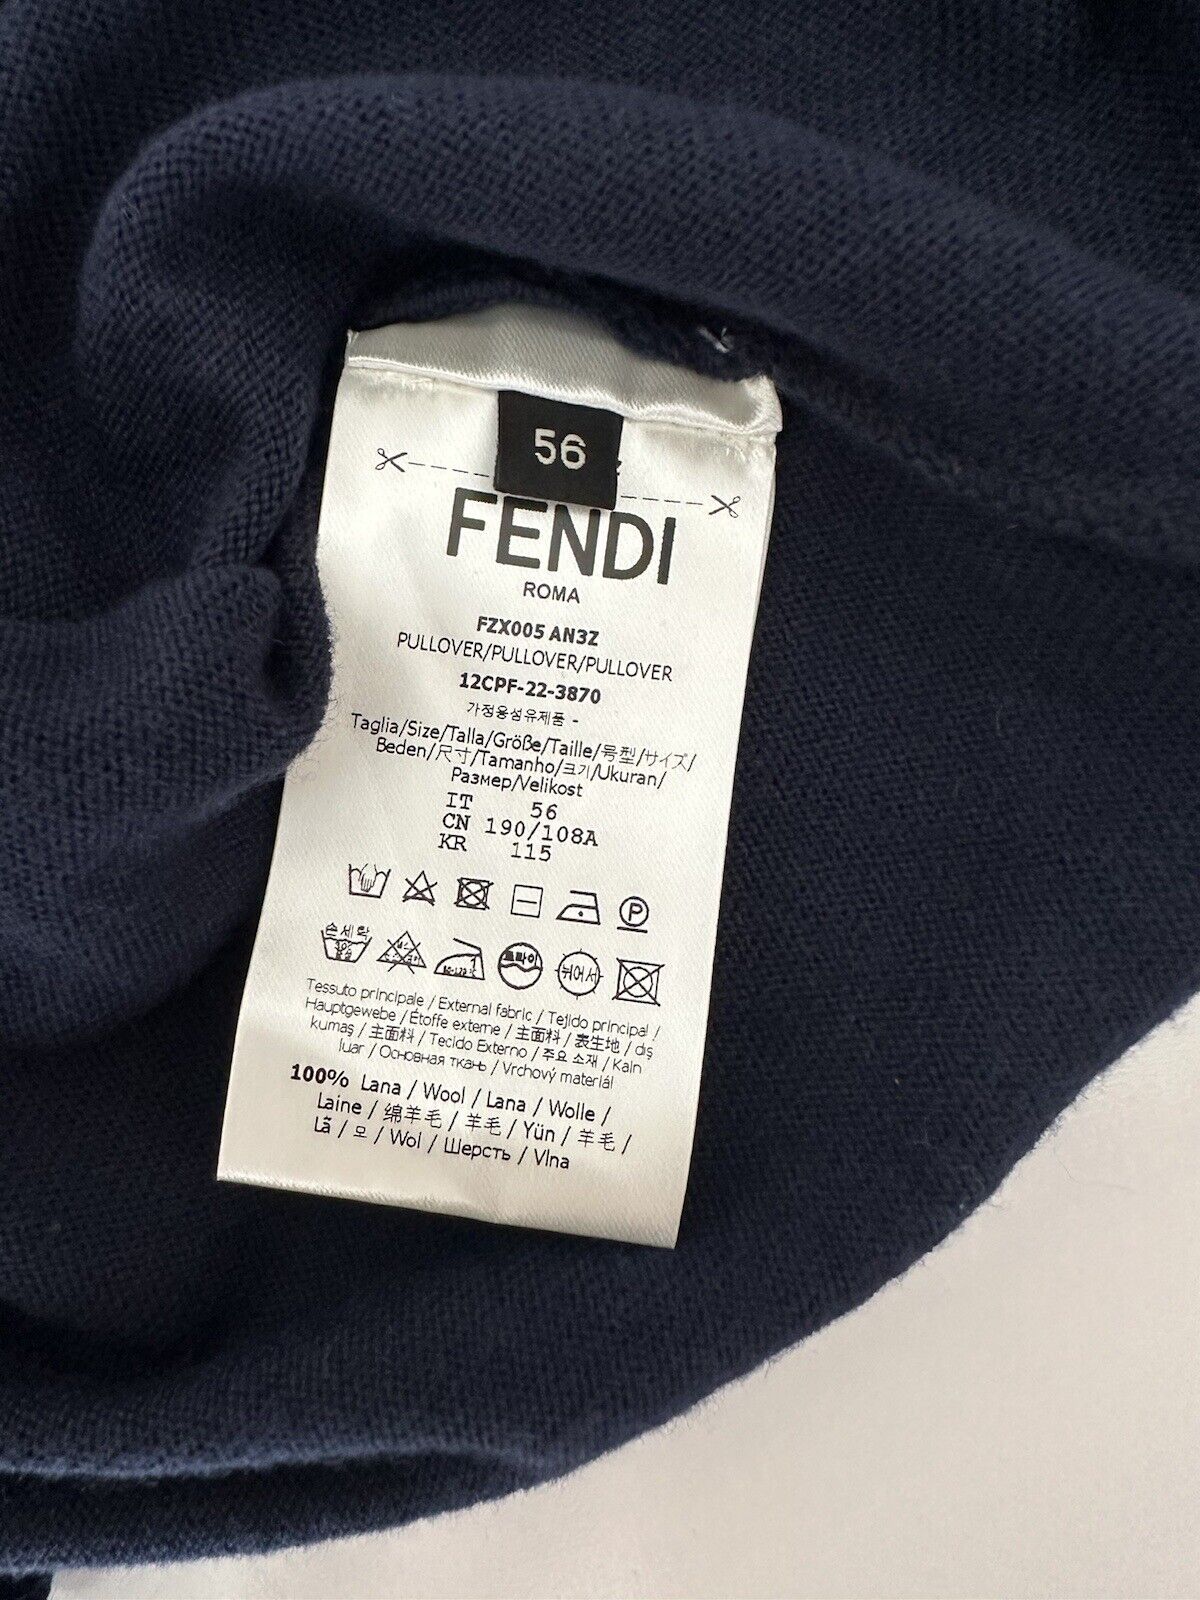 Fendi Knit Wool Sweater 56 Euro (Fits like L-XL) FZX005 Made in Italy NWT $1350